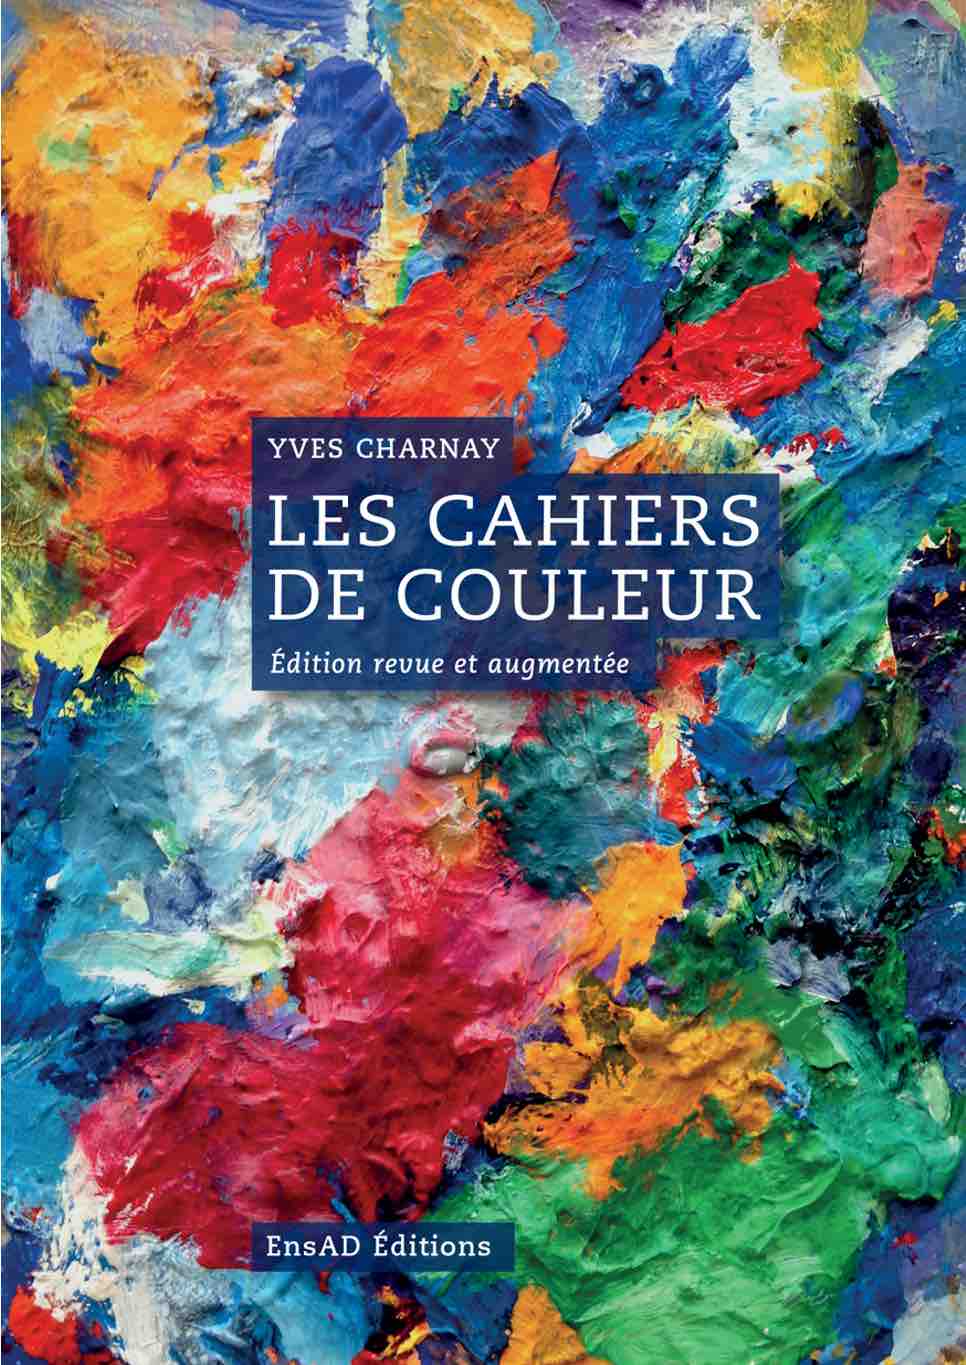 Yves Charnay. 2019 Les Cahiers de couleurs